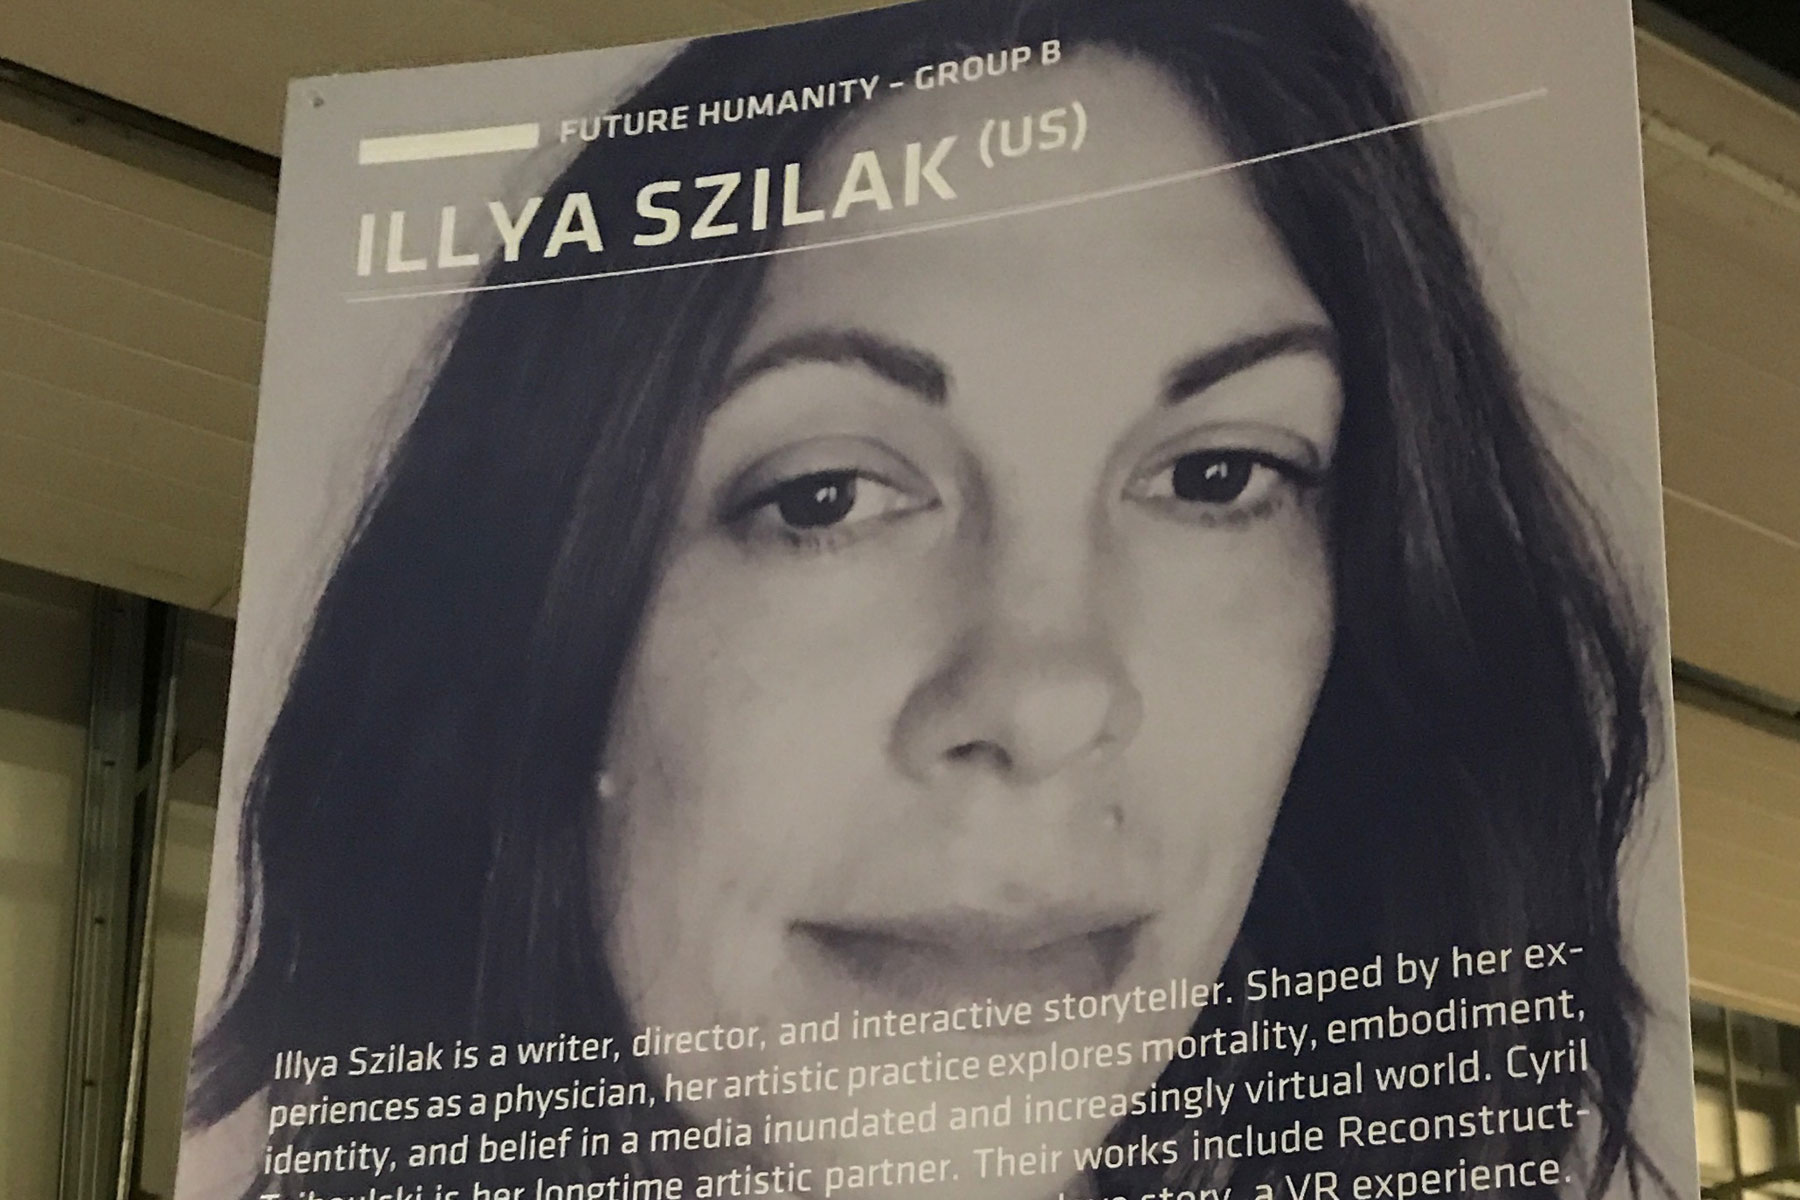 Illya Szilak / Future Humanity poster at Ars Electronica 2018